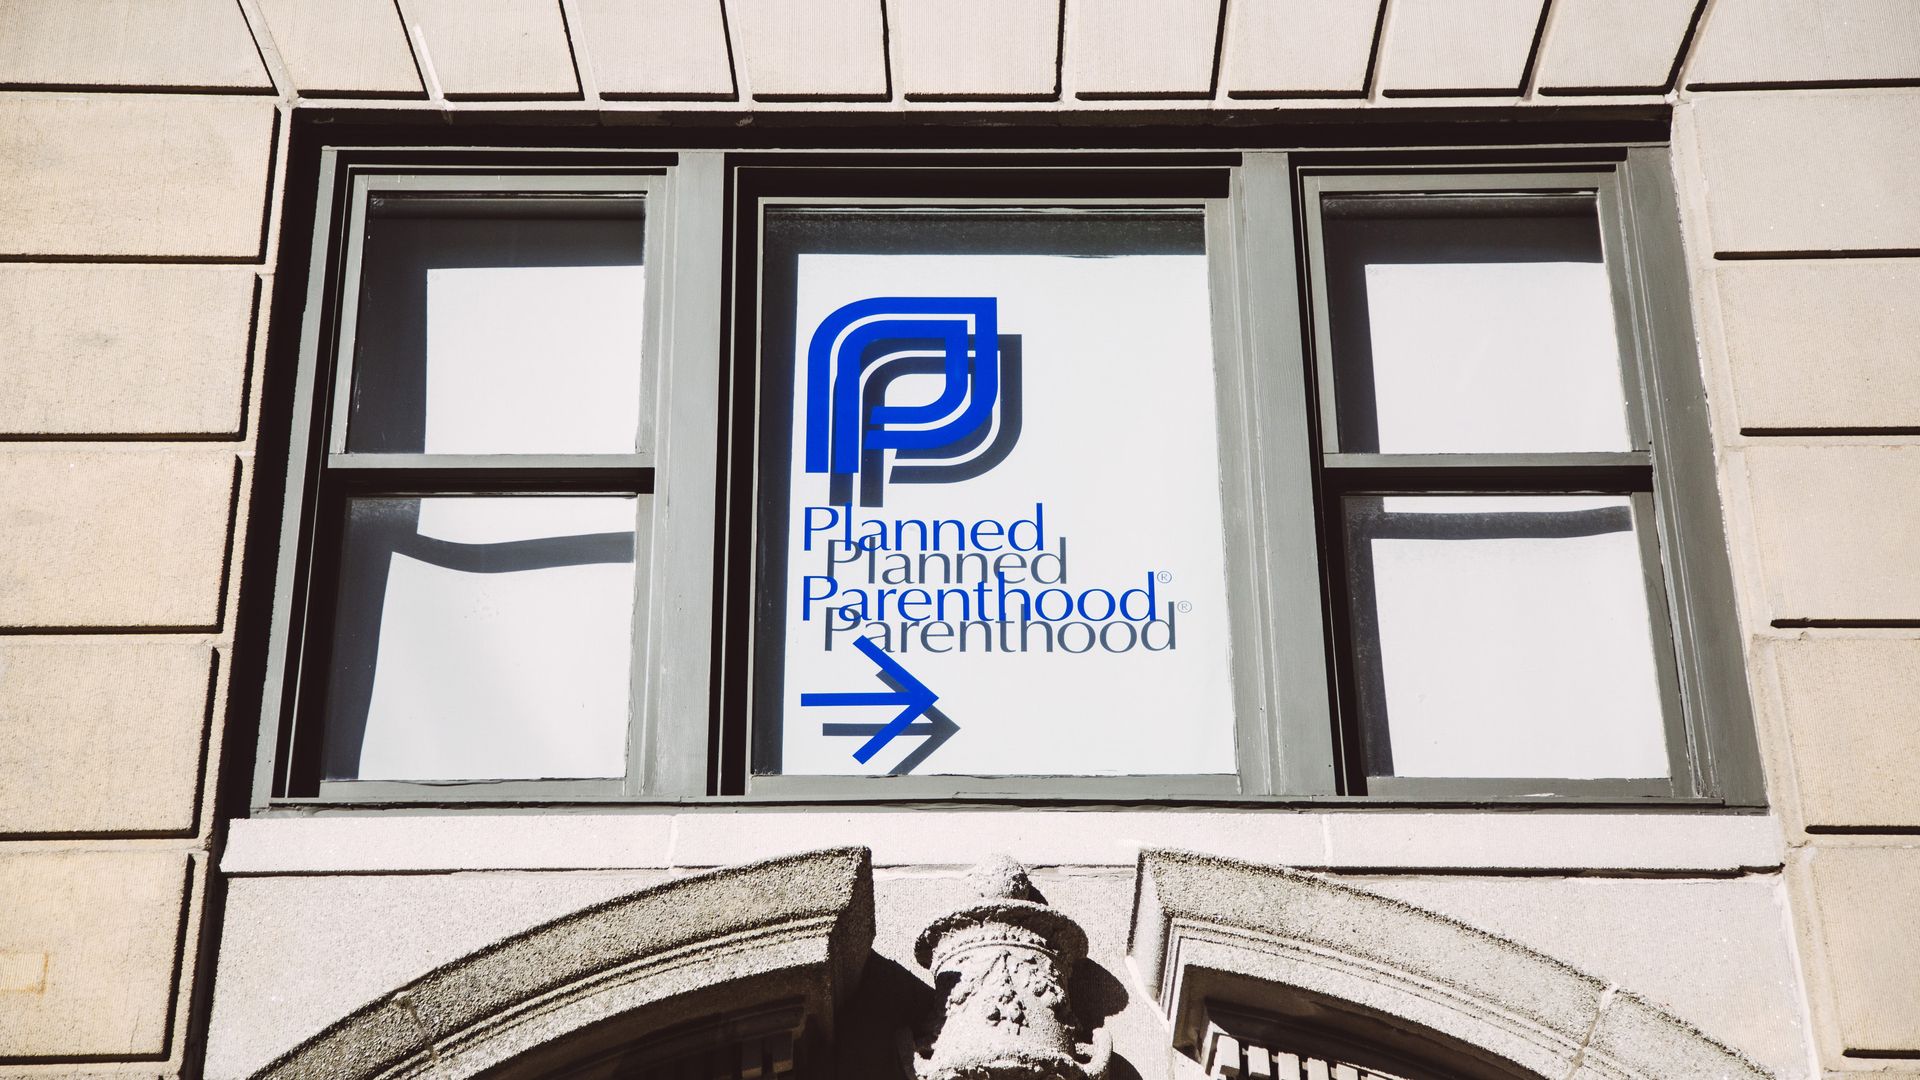 In this image, the Planned Parenthood logo is seen in a window 